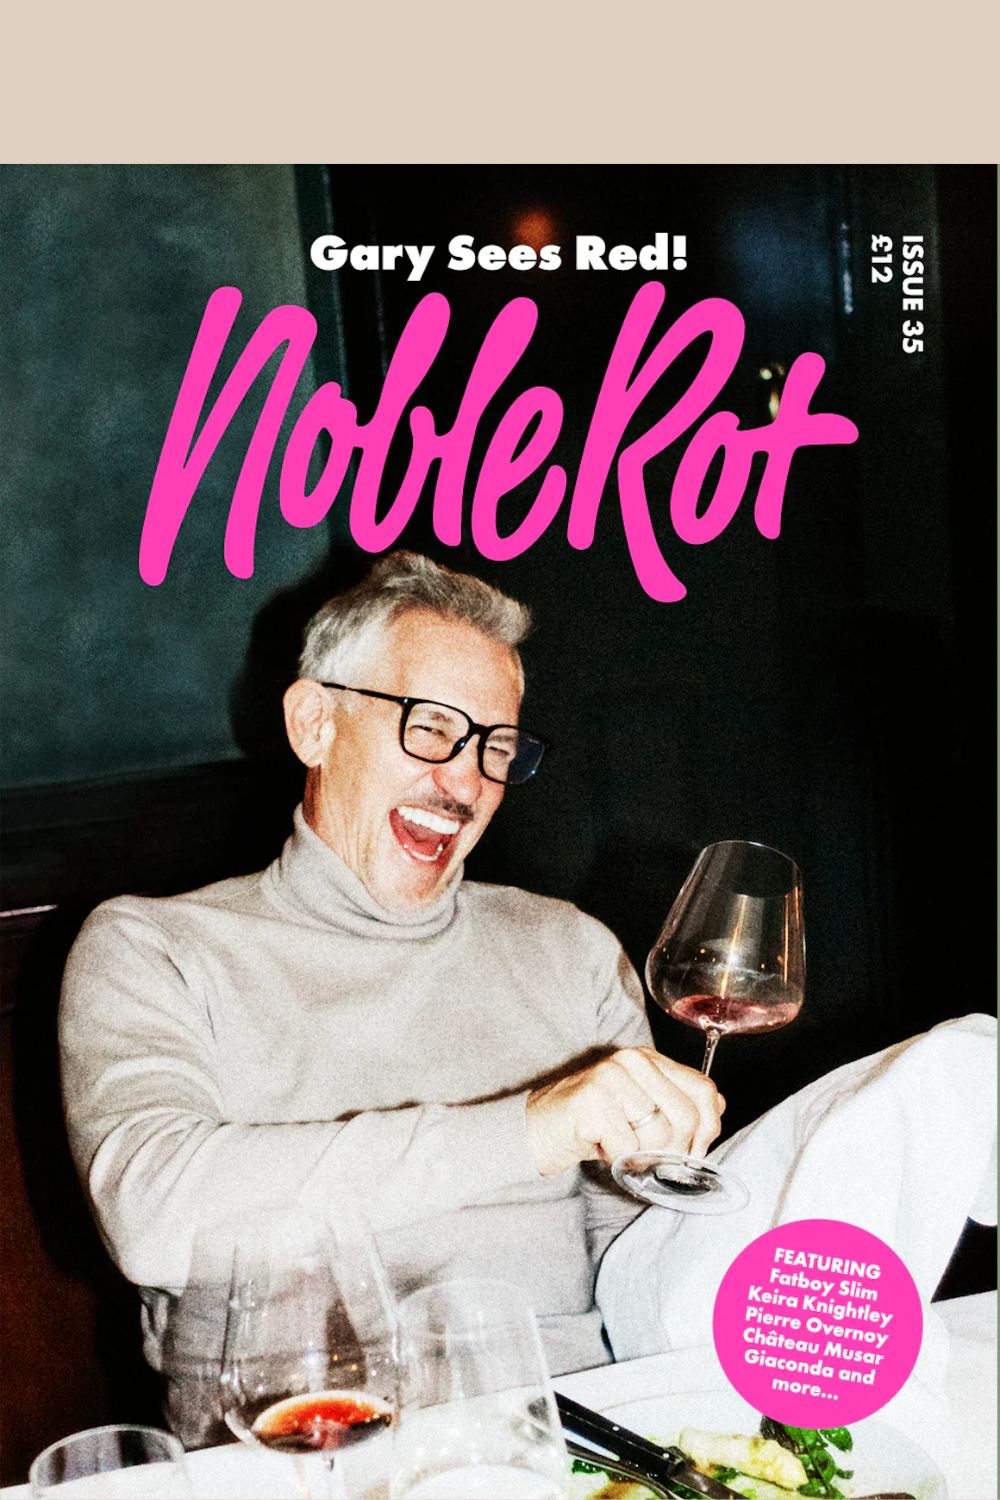 Noble Rot Issue 35 cover